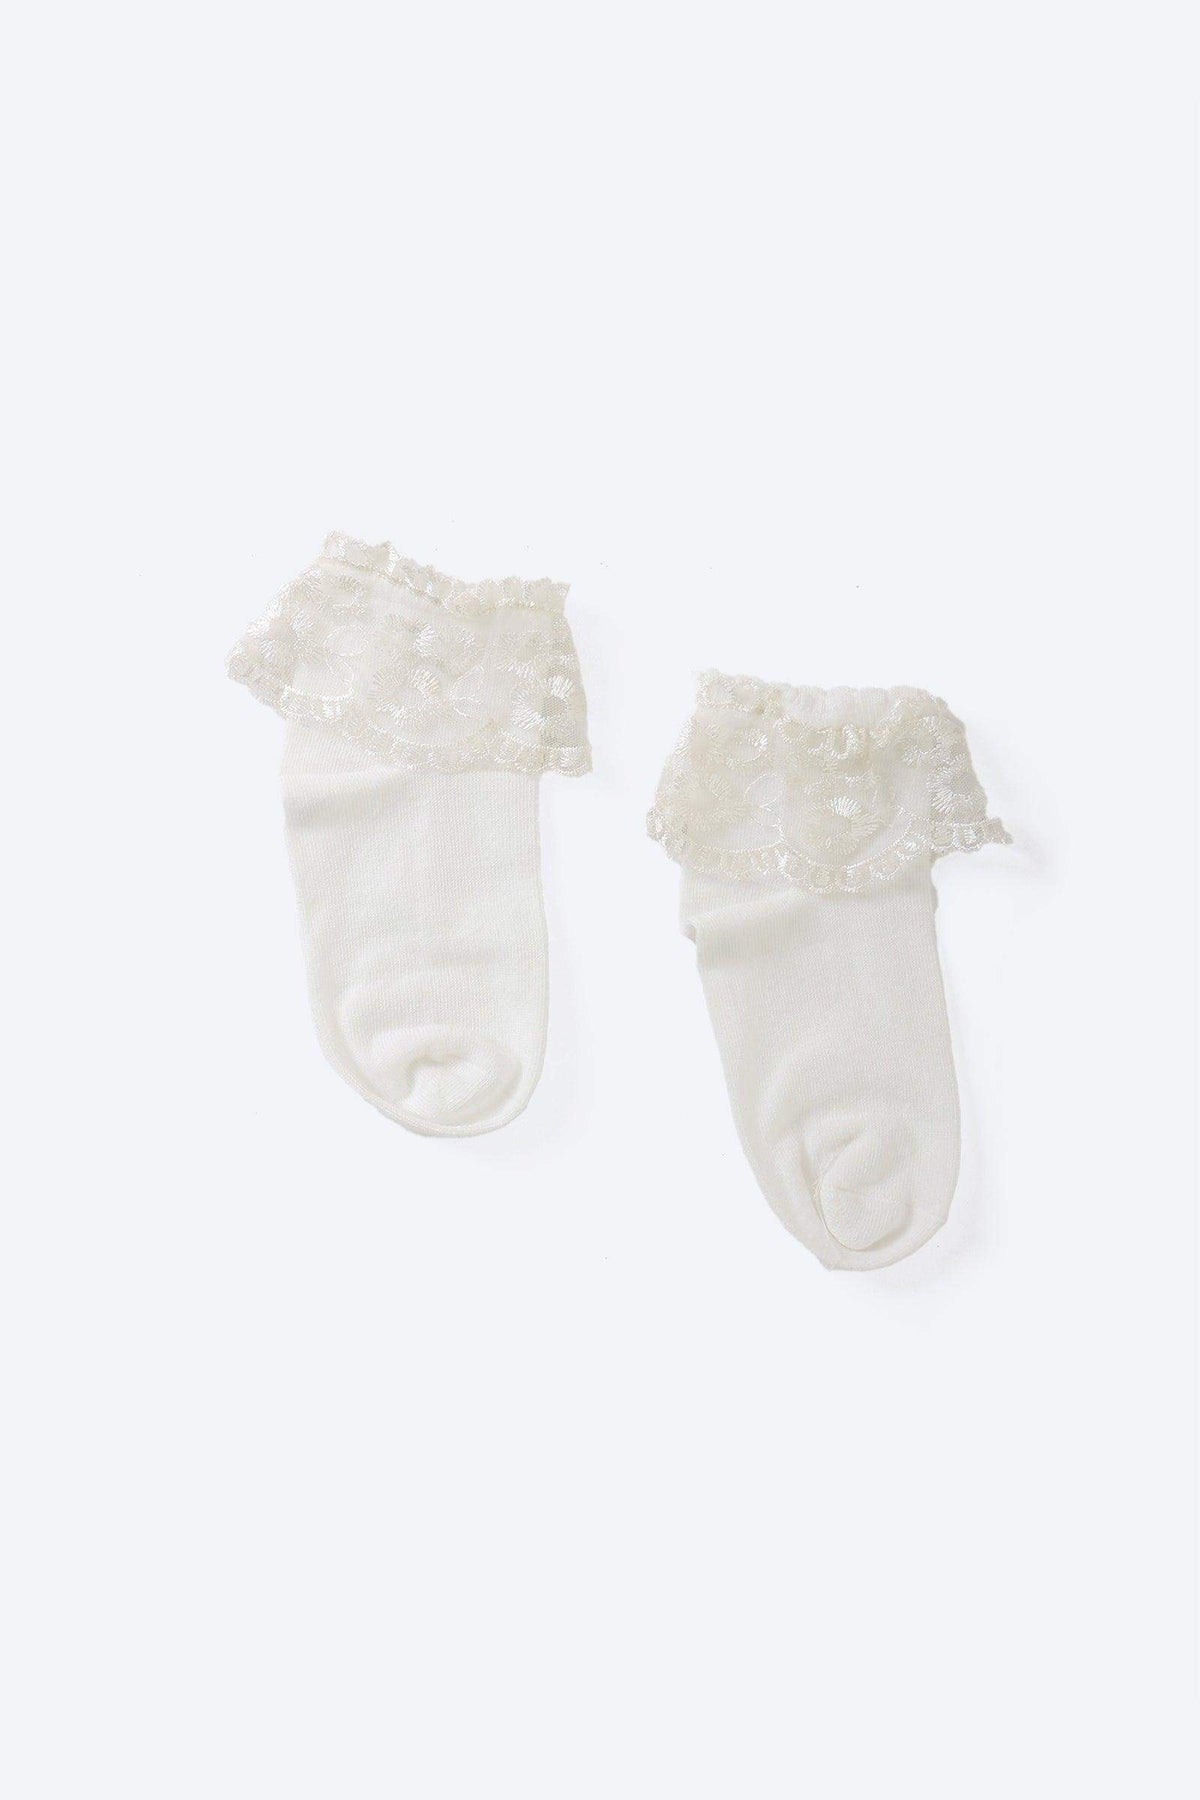 Girly Frilled Socks with Lace - Carina - كارينا